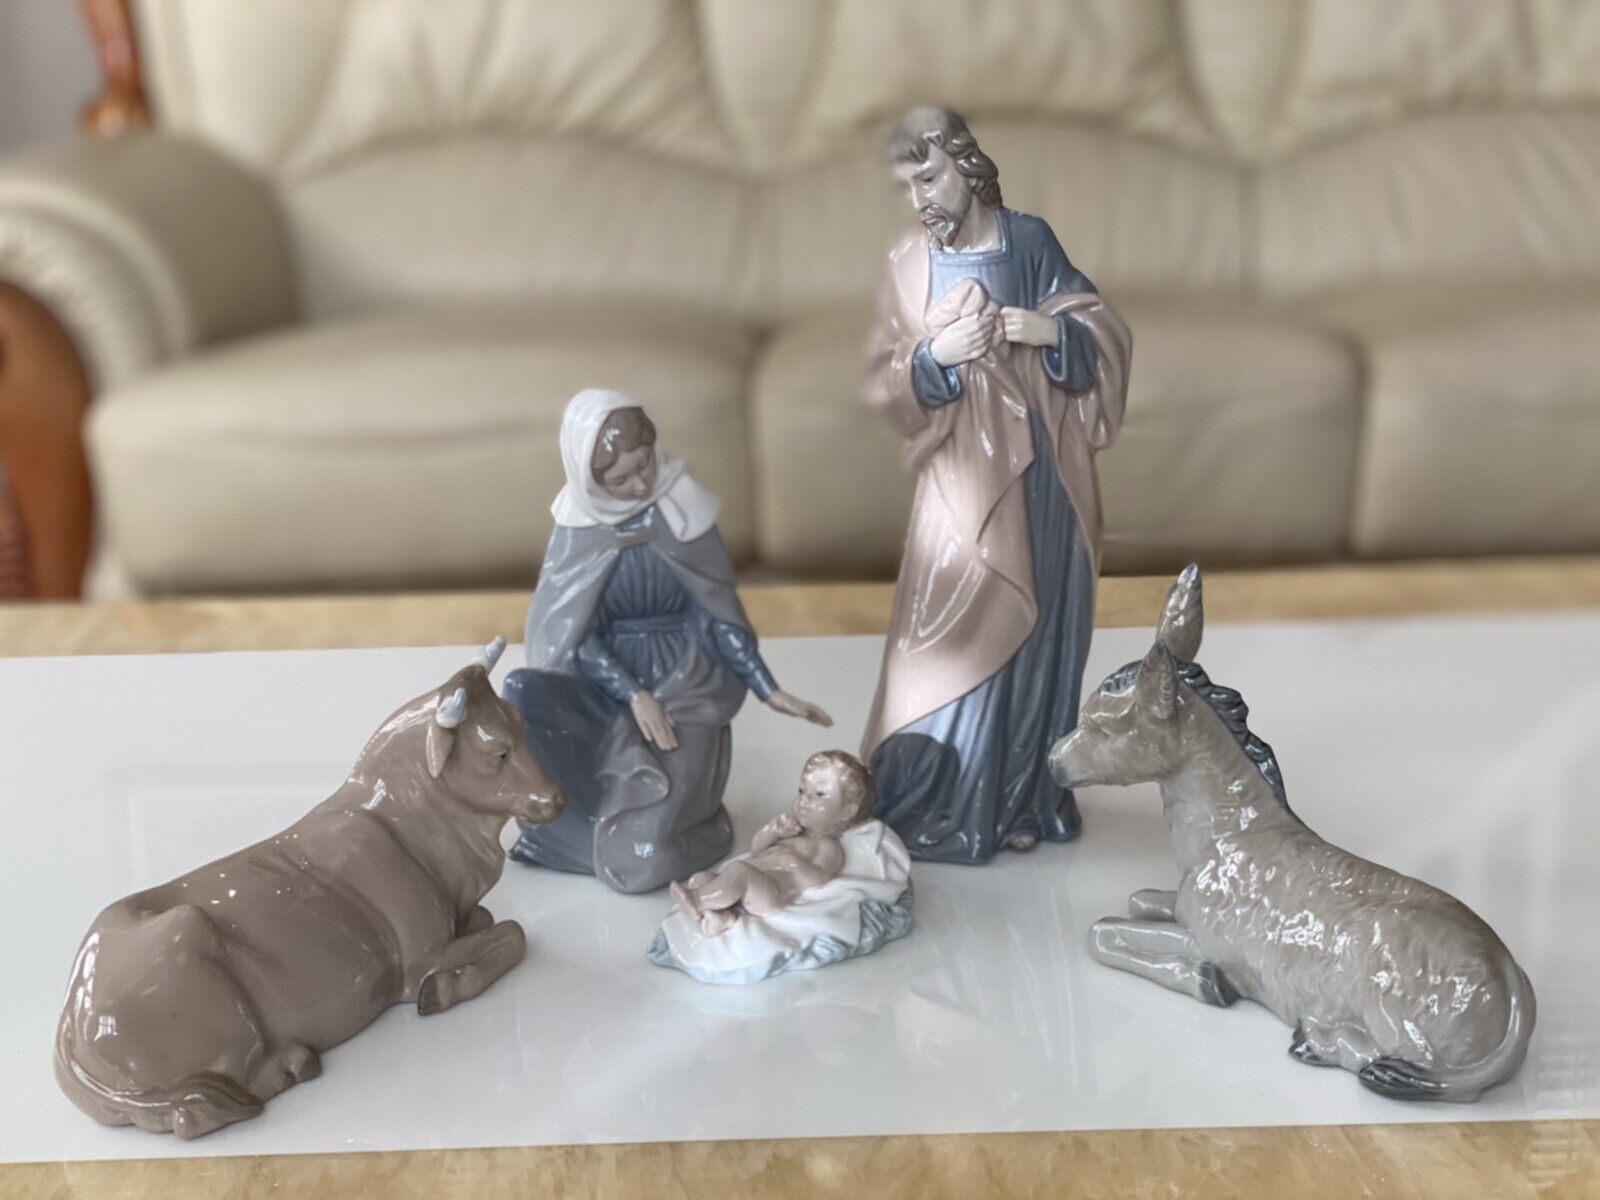 Vtg Nao by Lladro 5 Pieces Porcelain Nativity Figurines Set 1981 Spain Christmas